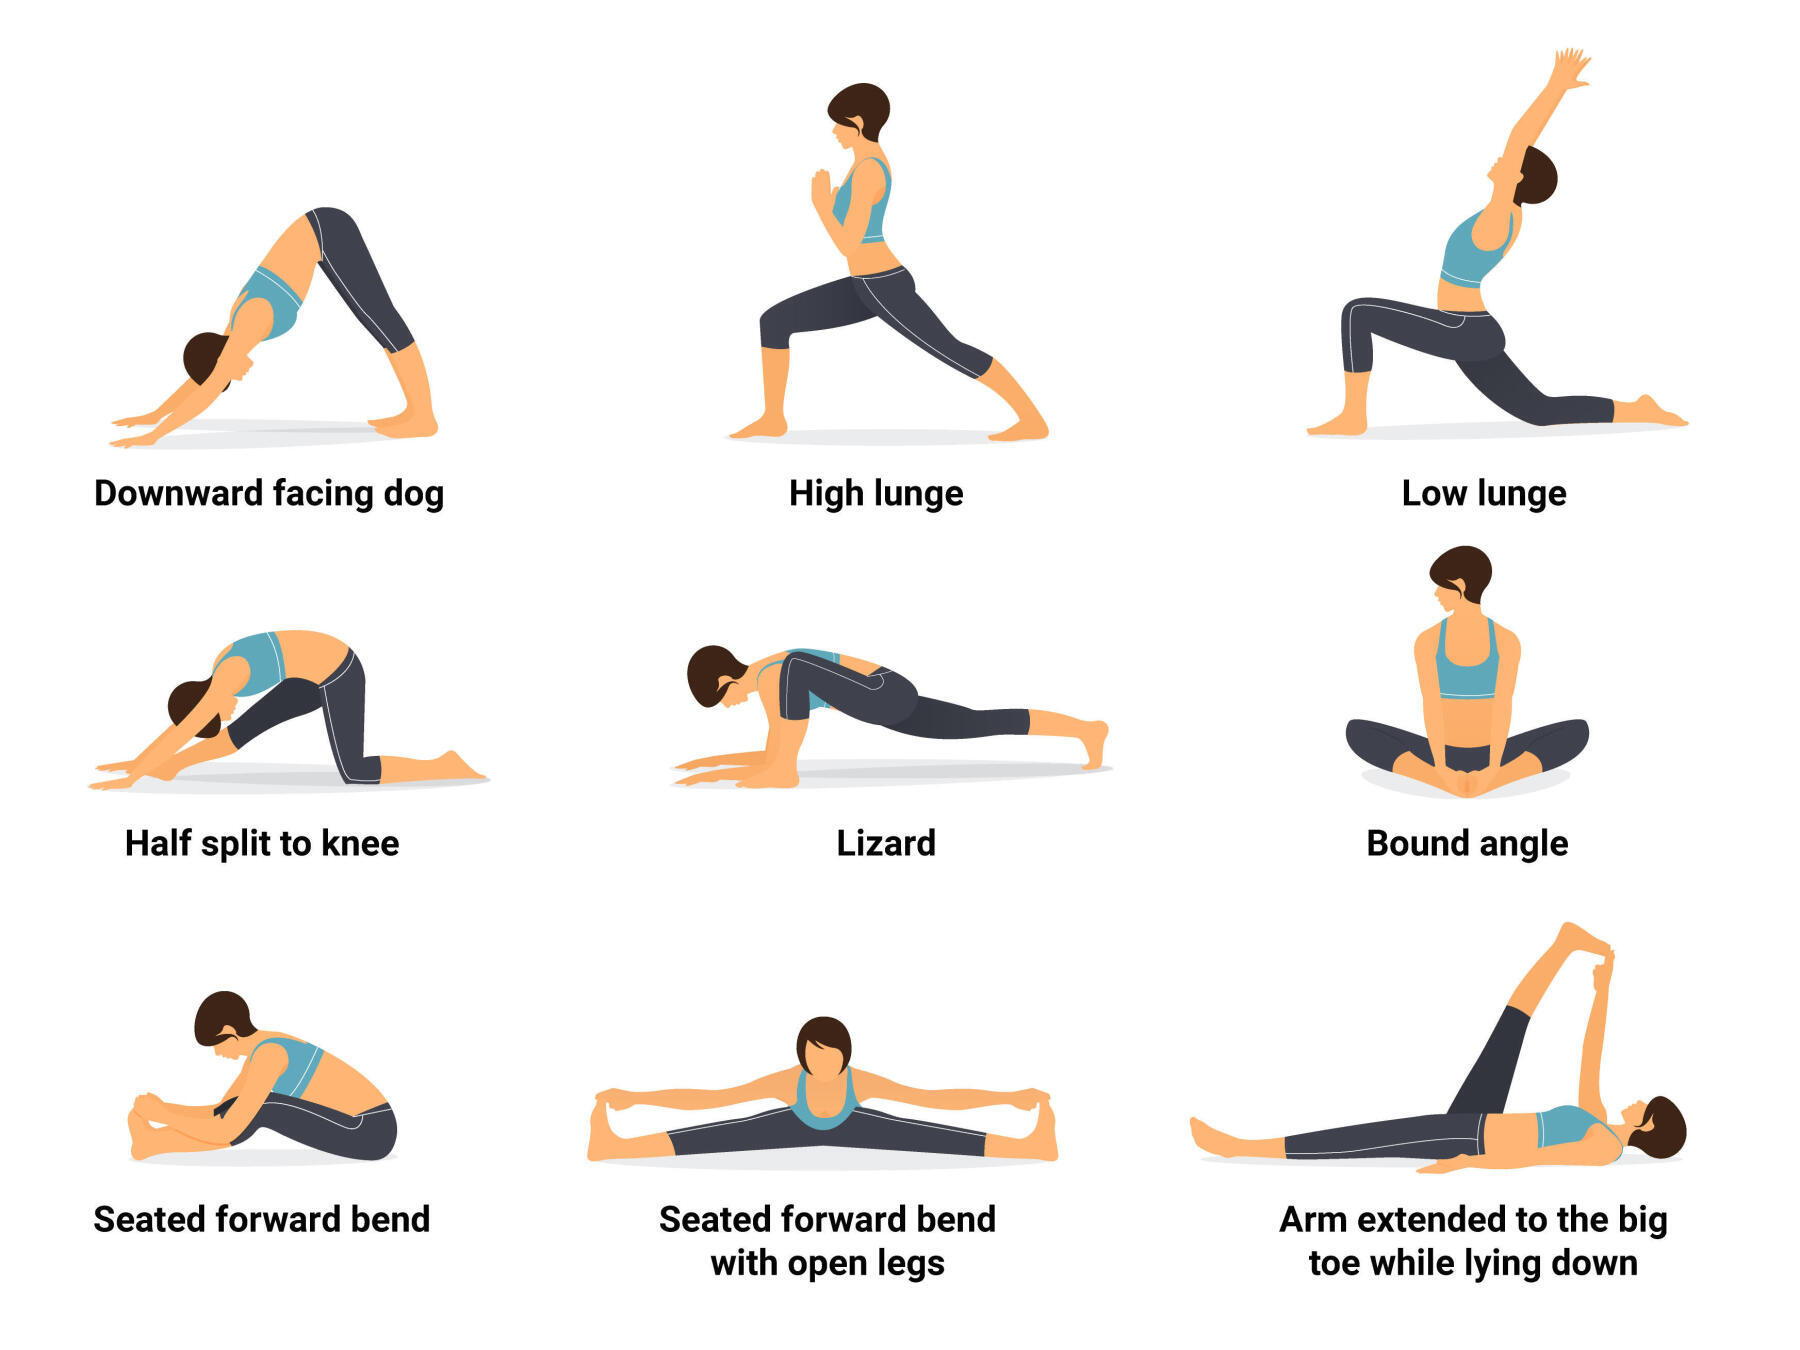 Muscle Contractions in Yoga